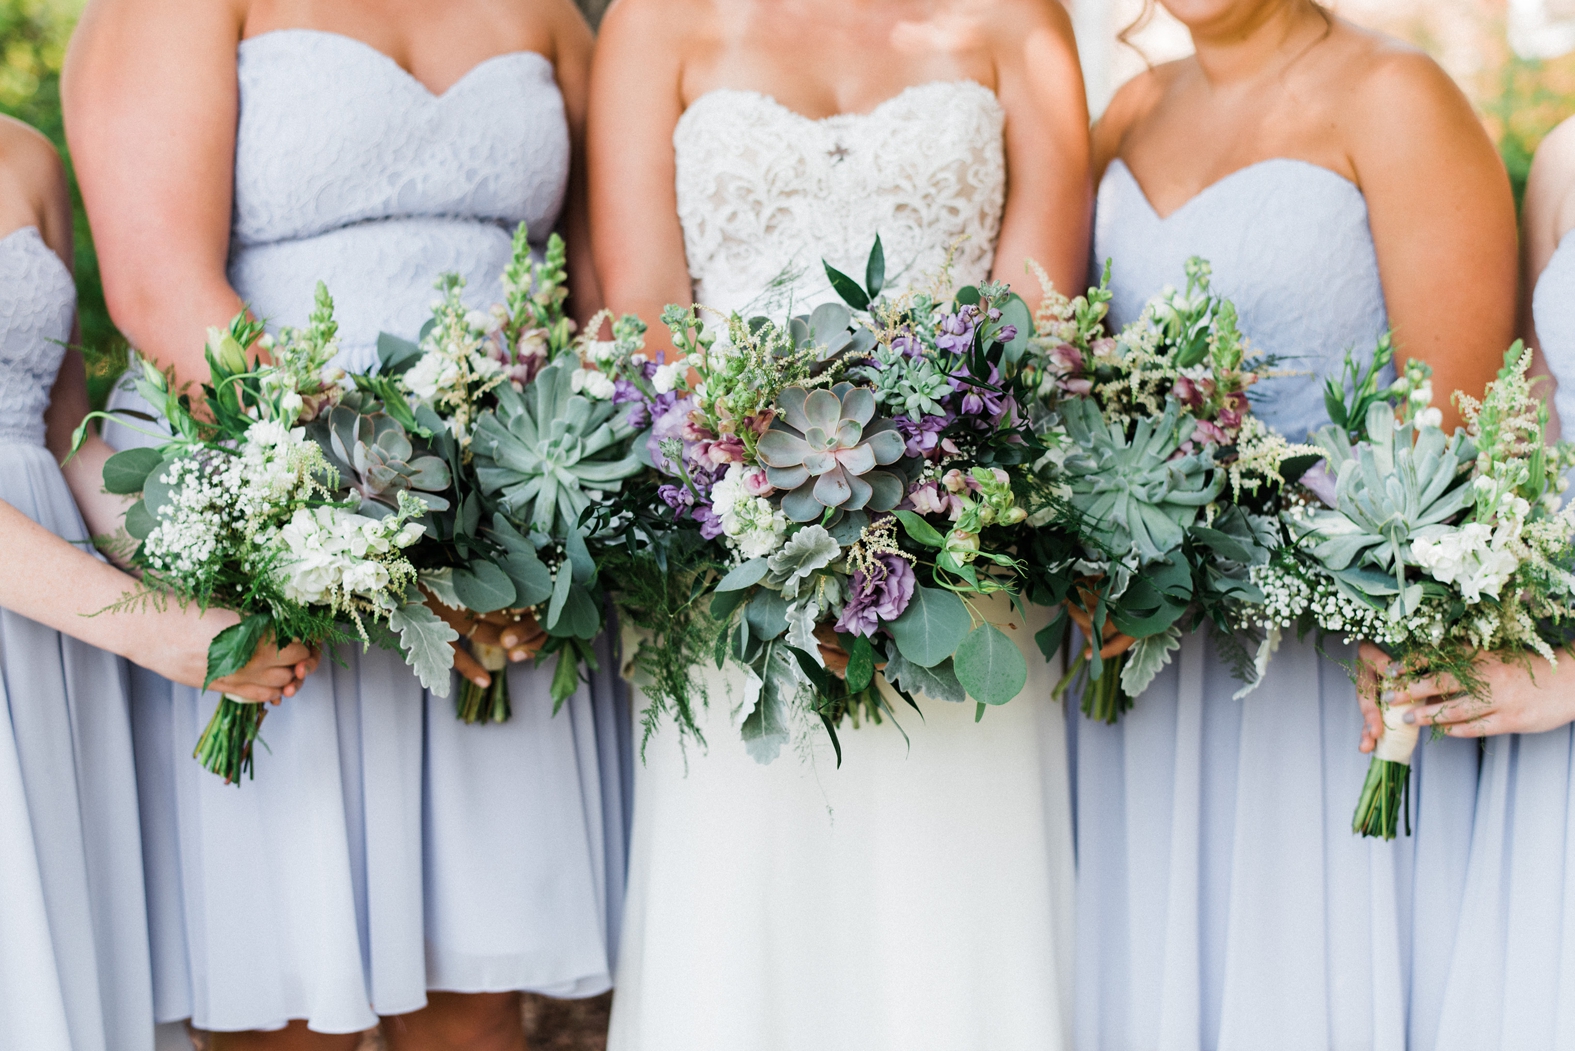 Bride and bridesmaids in light purple lavender dresses holding purple bouquets with succulents and silver dollar eucalyptus